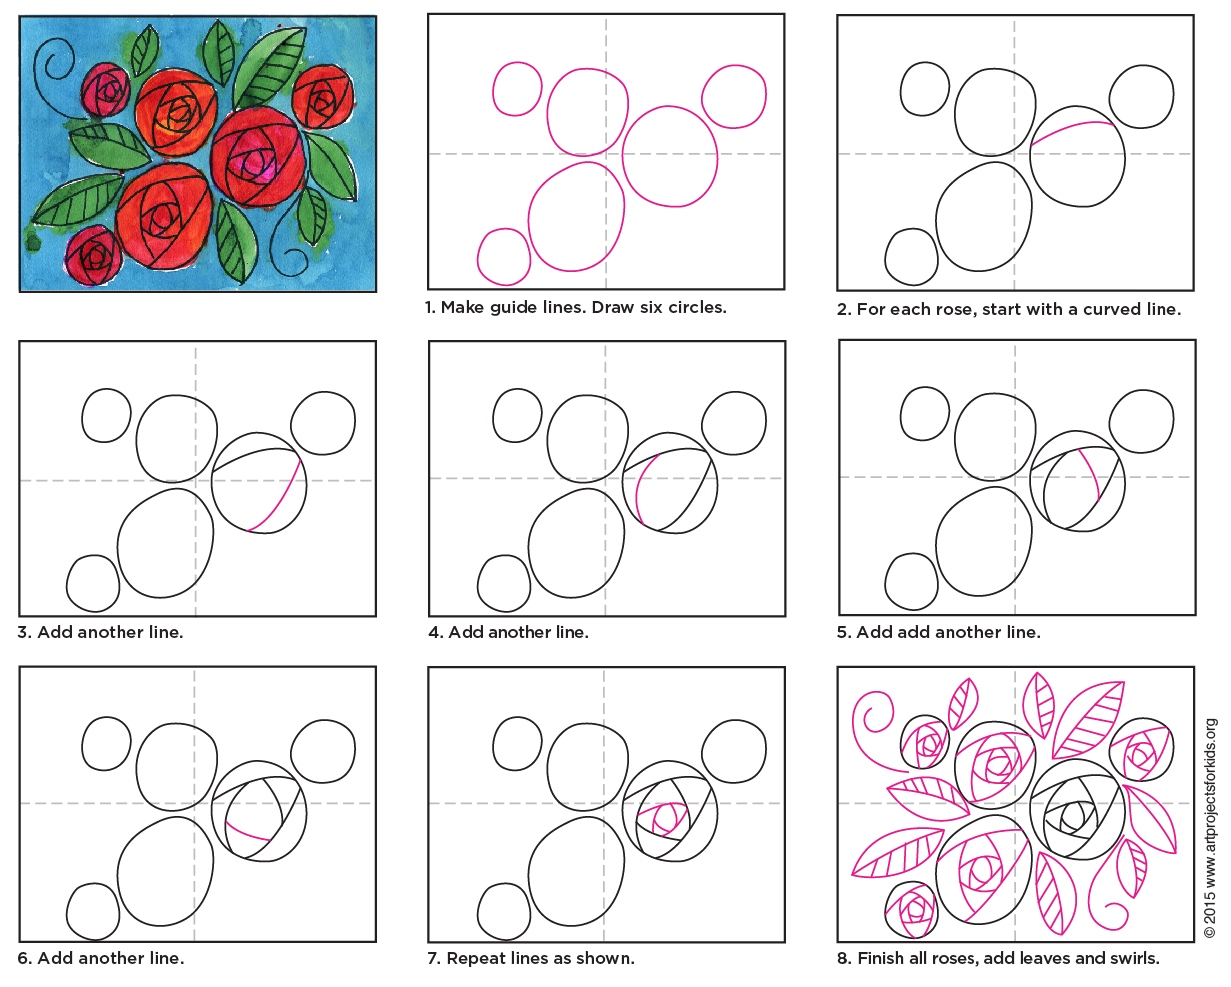 How To Draw A Doodle Rose Art Projects For Kids